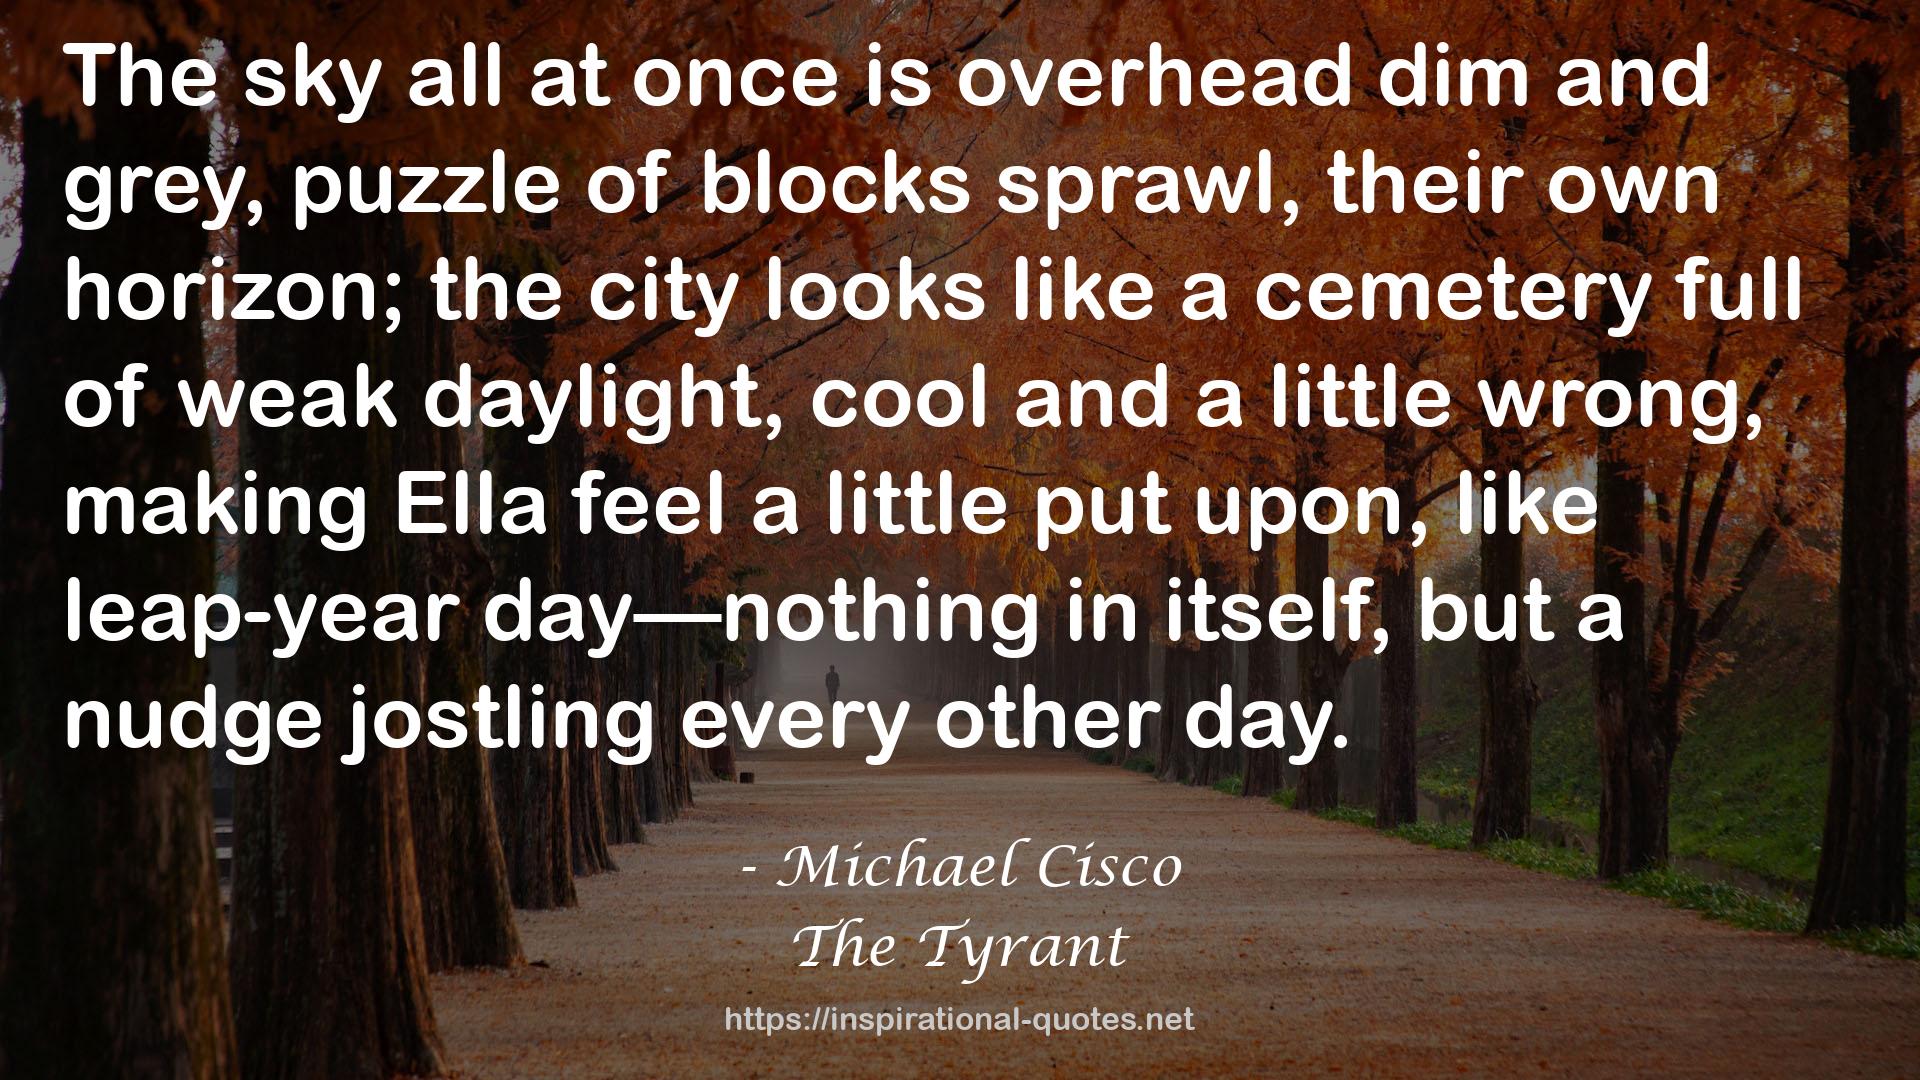 The Tyrant QUOTES